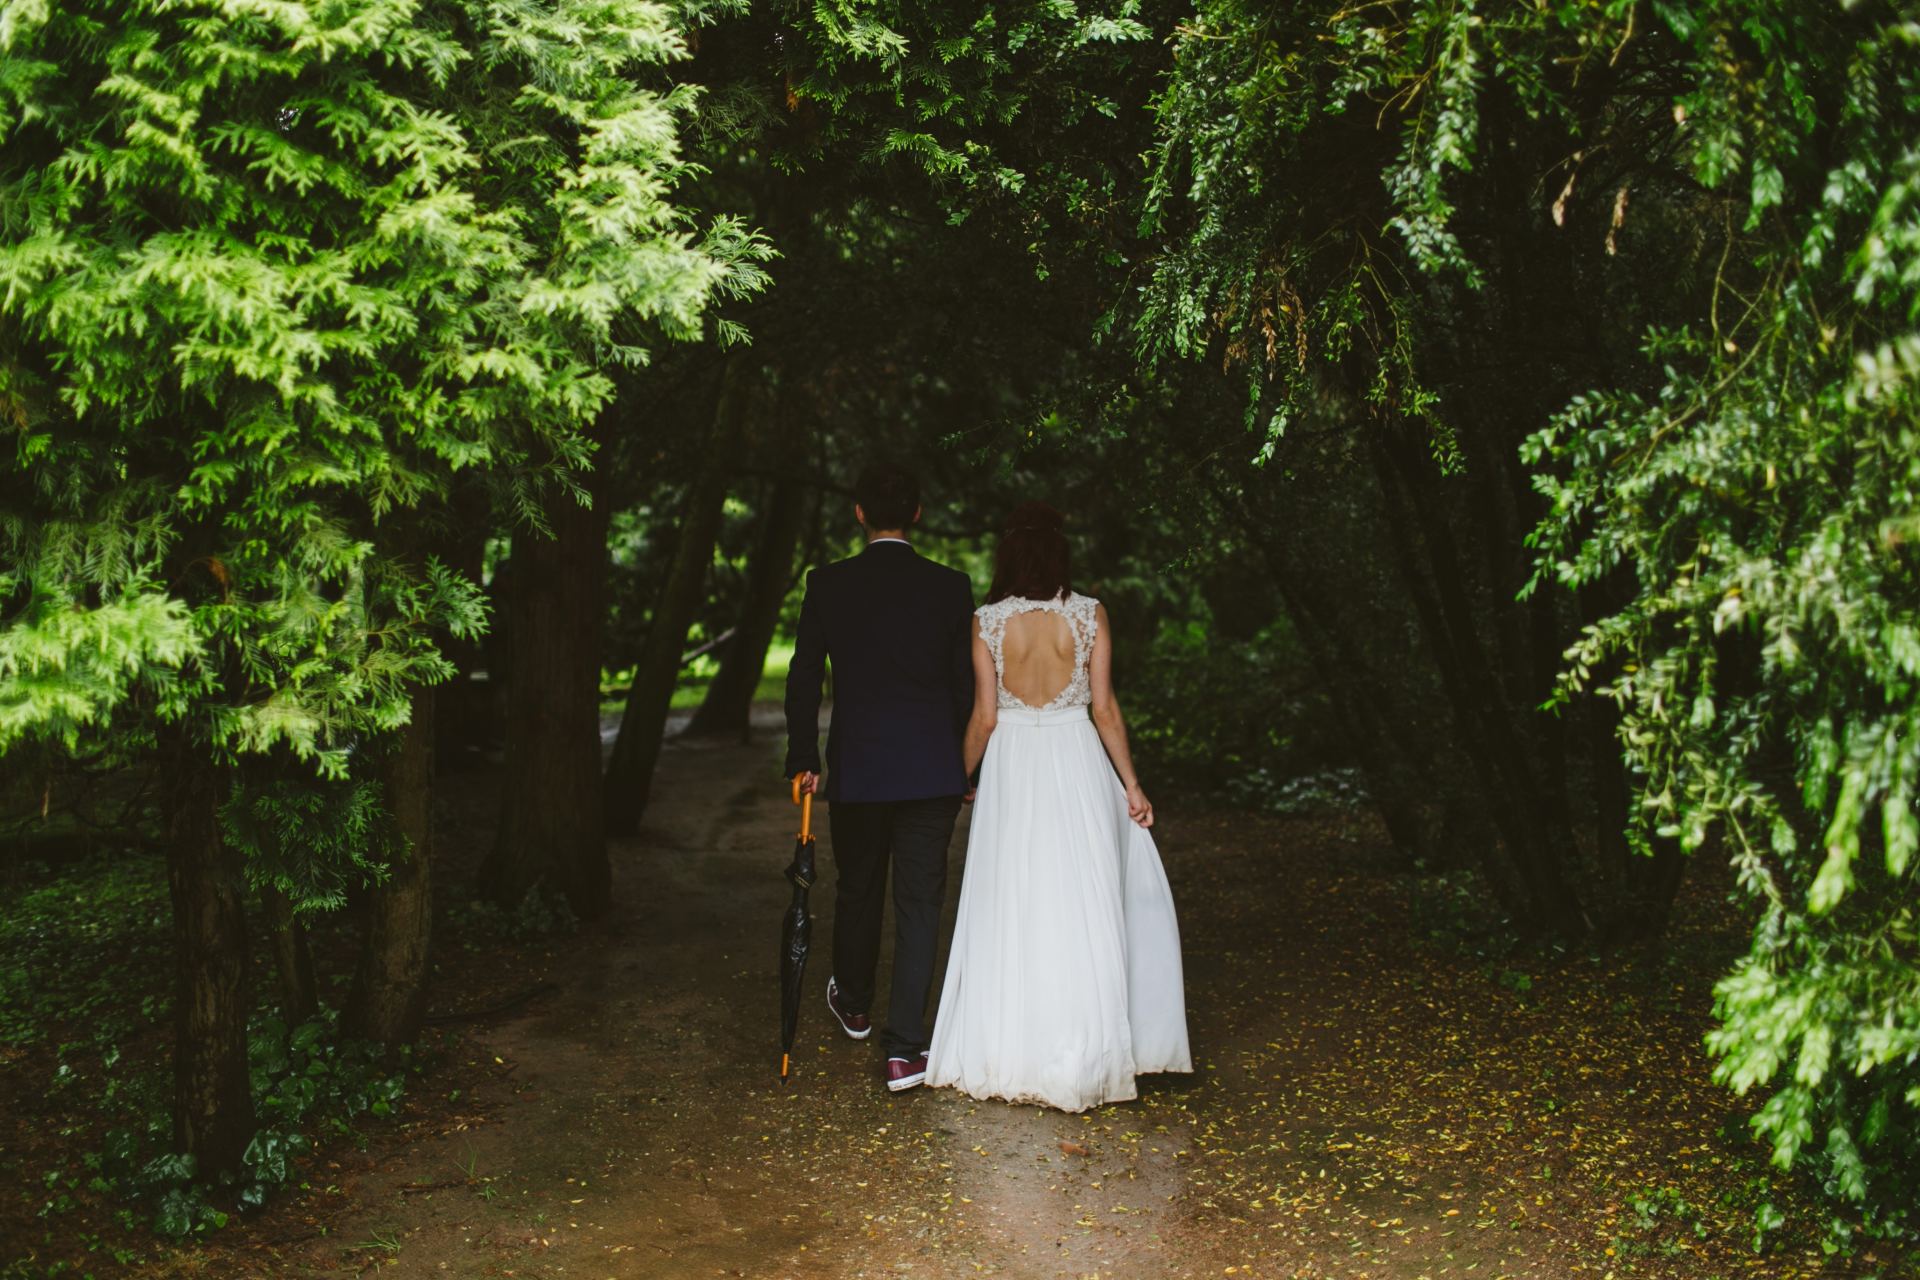 bridal couple walk through green tree covered park in wet weather with umbrella